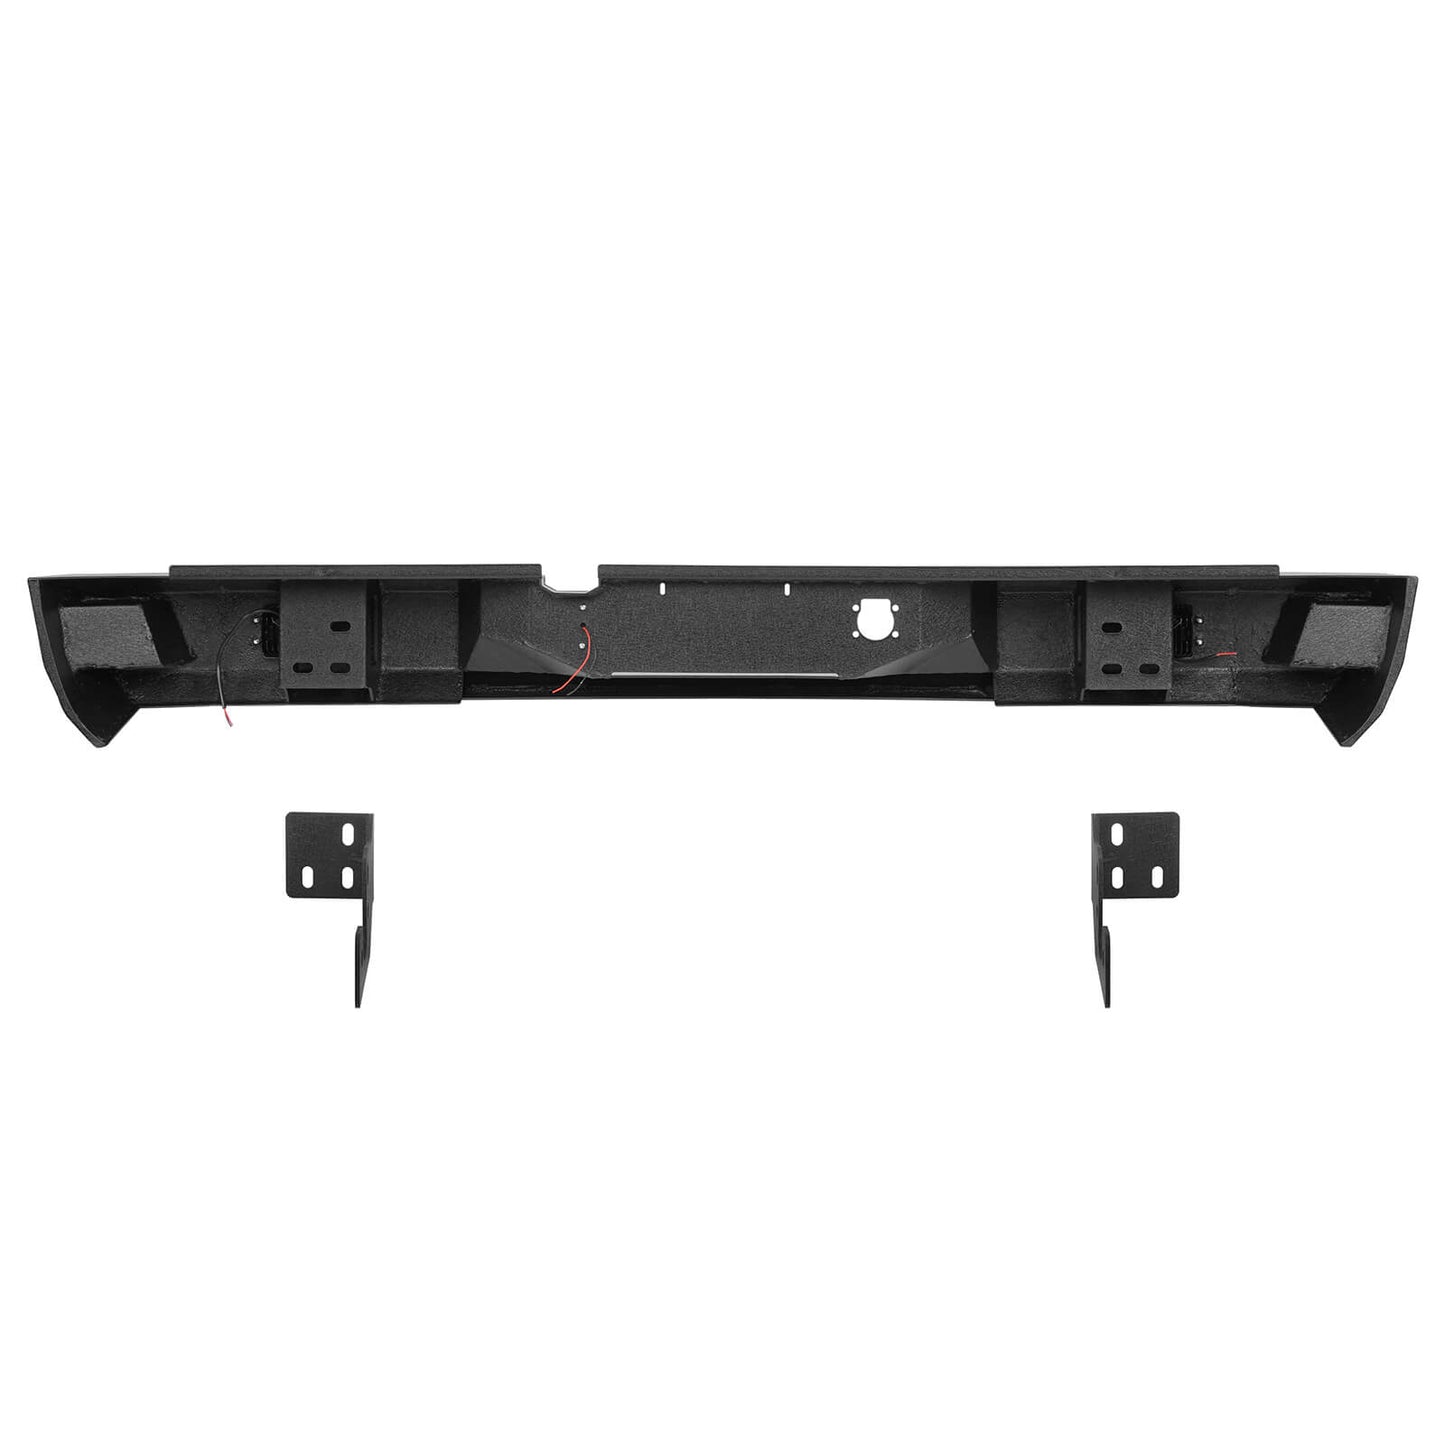 2003-2005 Dodge Ram 2500 Discovery Steel Rear Bumper Replacement BXG.6462 4